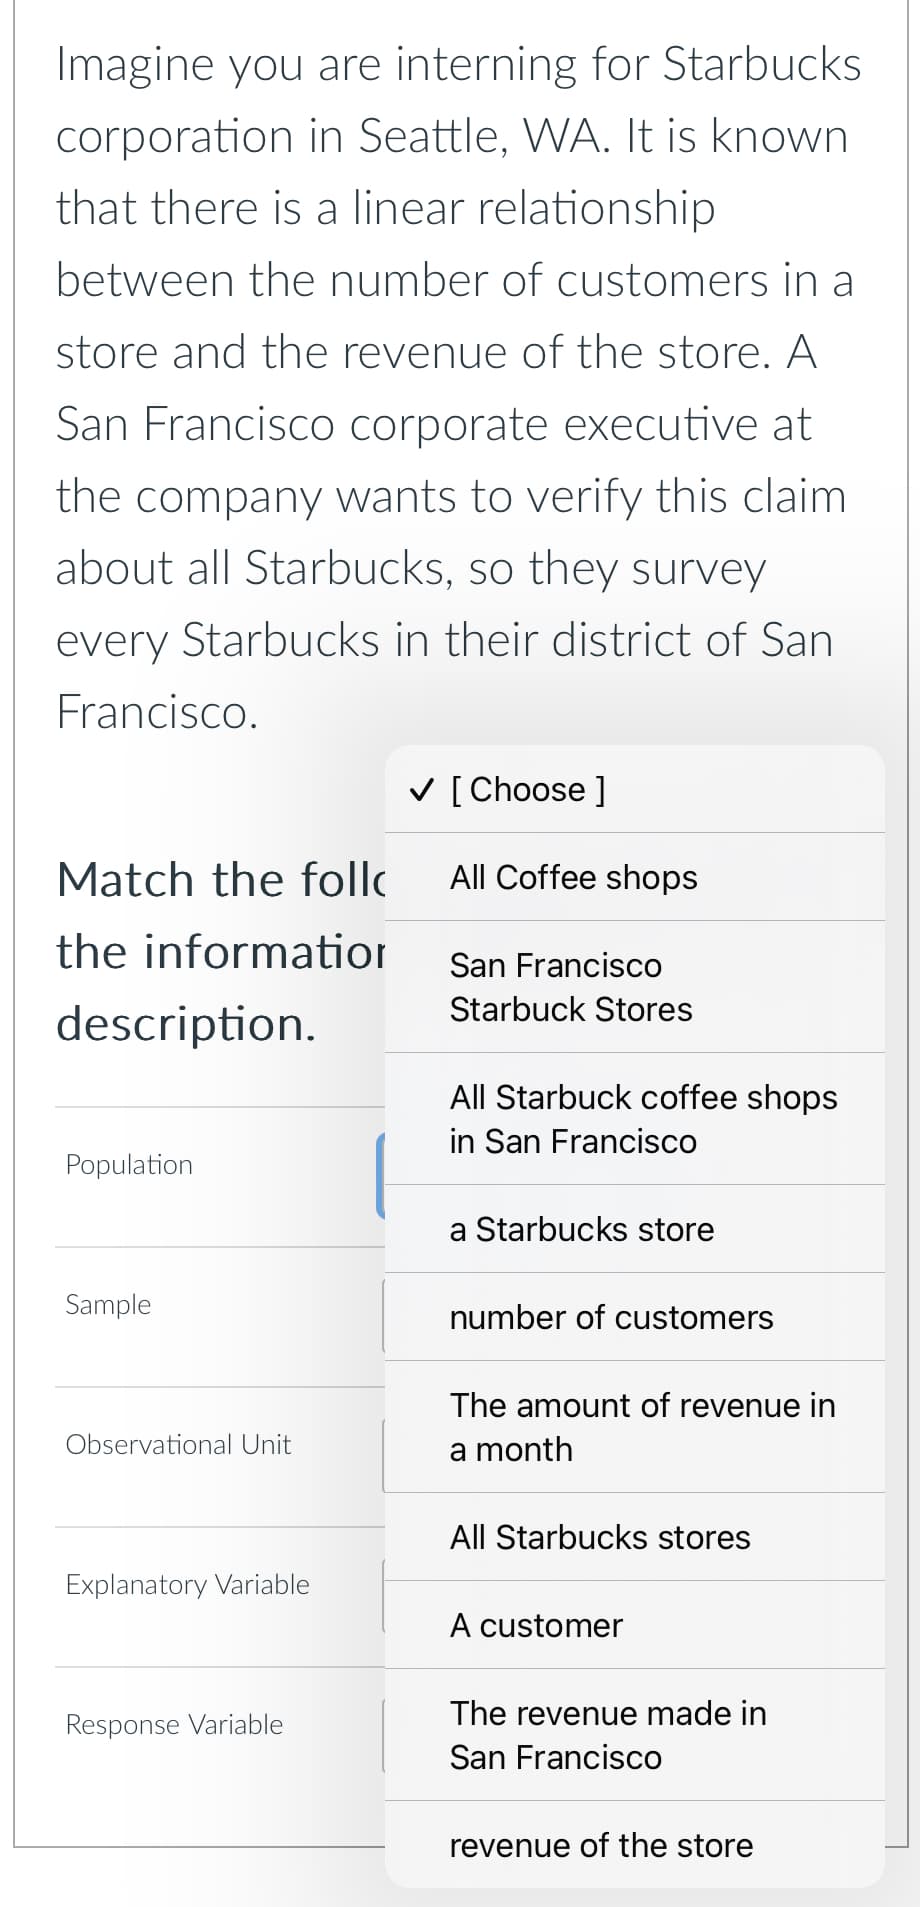 Imagine you are interning for Starbucks
corporation in Seattle, WA. It is known
that there is a linear relationship
between the number of customers in a
store and the revenue of the store. A
San Francisco corporate executive at
the company wants to verify this claim
about all Starbucks, so they survey
every Starbucks in their district of San
Francisco.
Match the foll
the information
description.
✓ [Choose ]
All Coffee shops
San Francisco
Starbuck Stores
All Starbuck coffee shops
in San Francisco
Population
Sample
Observational Unit
Explanatory Variable
Response Variable
a Starbucks store
number of customers
The amount of revenue in
a month
All Starbucks stores
A customer
The revenue made in
San Francisco
revenue of the store